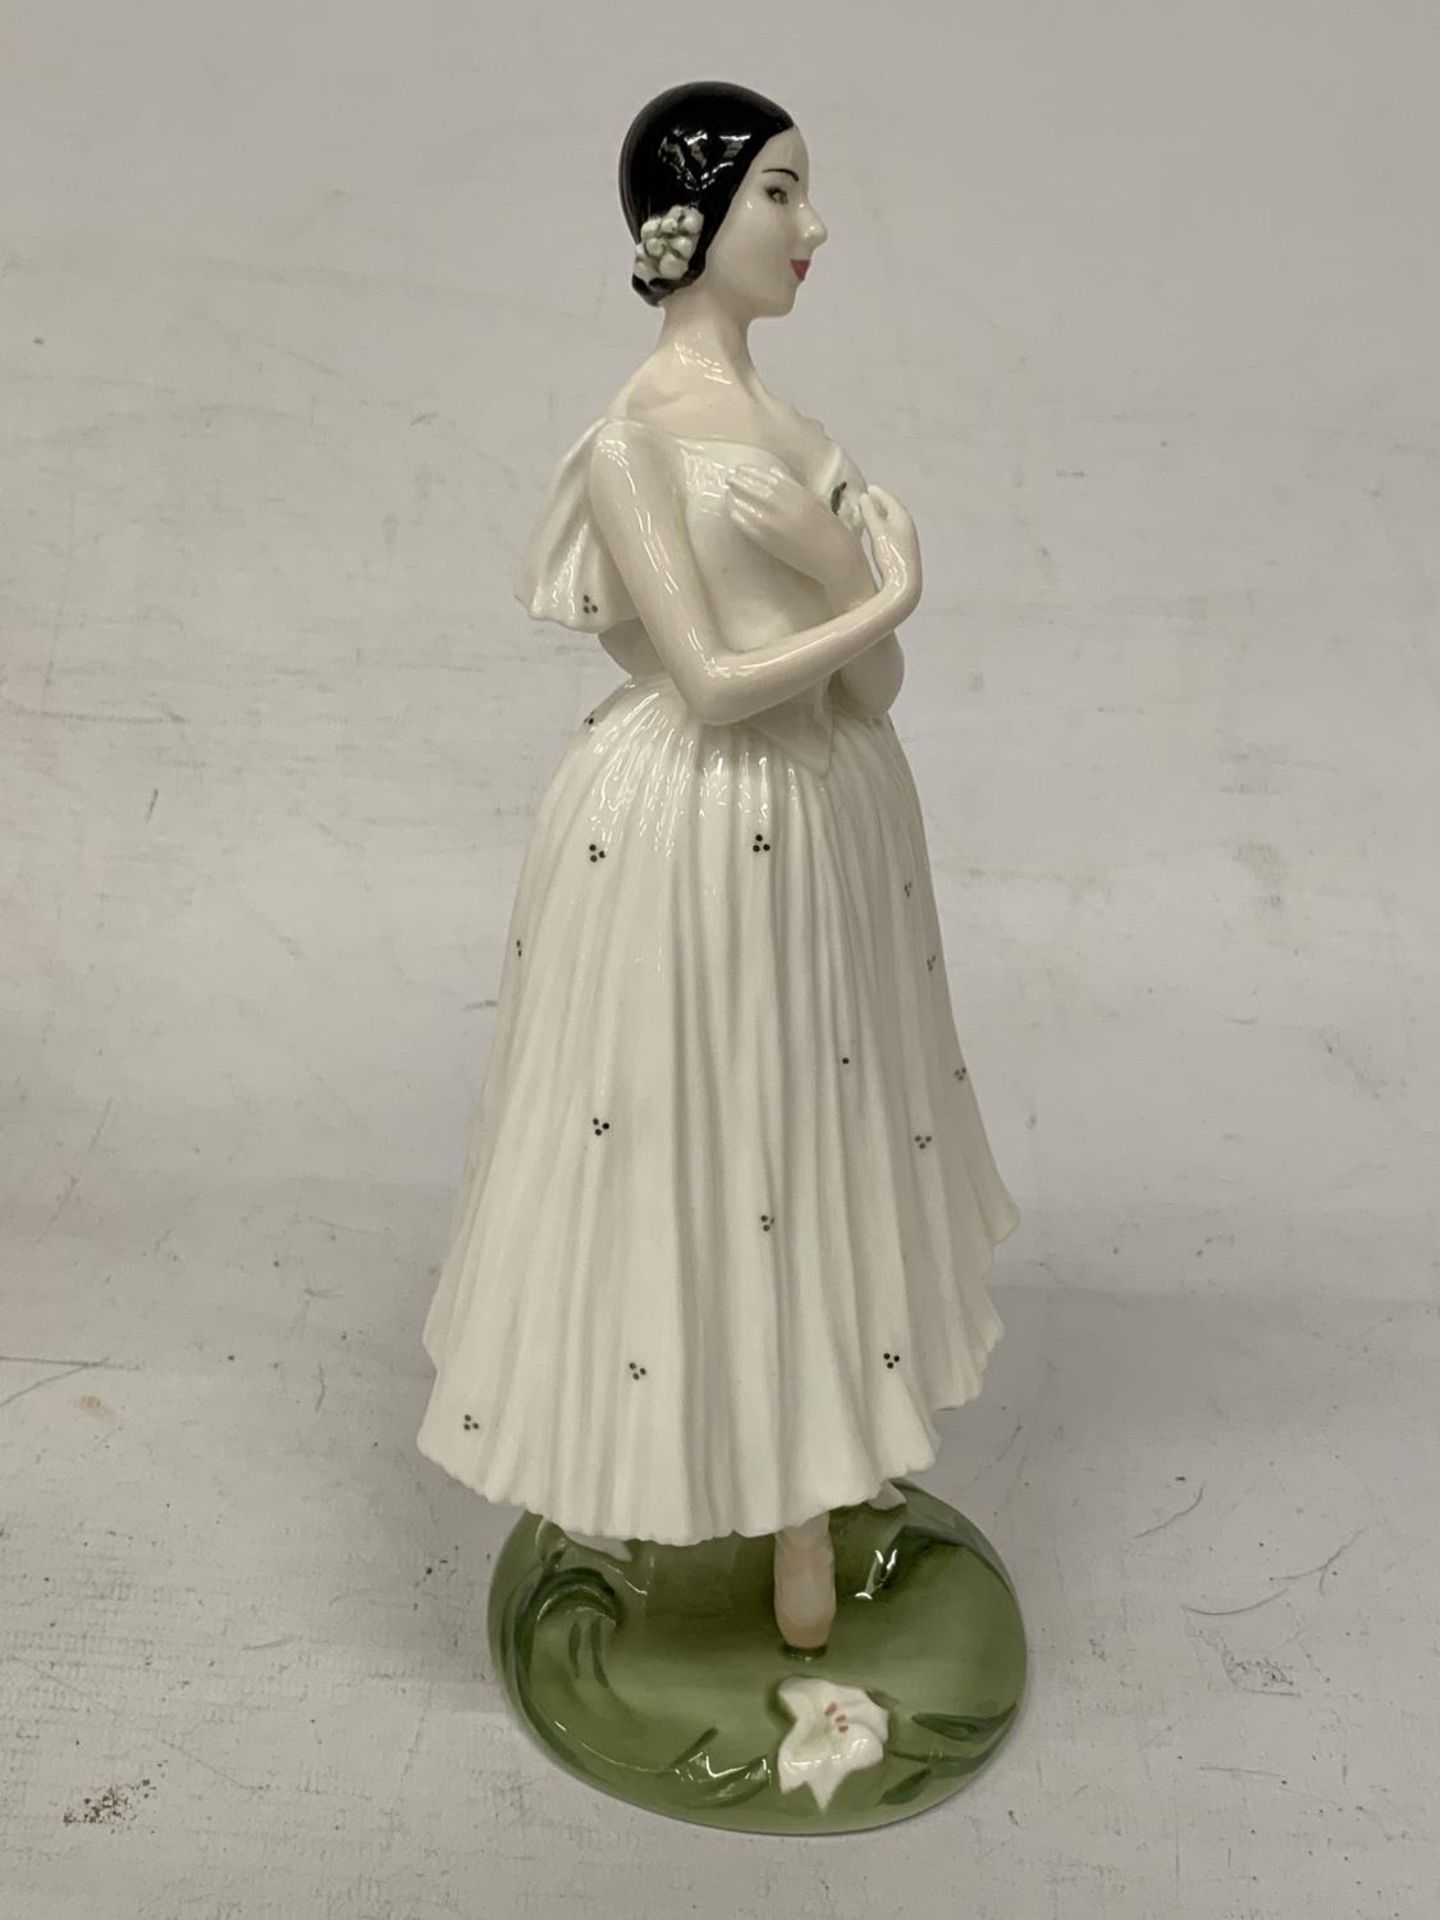 A COALPORT FIGURINE "DAME ALICE MARKOVA" IN THE ROYAL ACADEMY OF DANCING COLLECTION LIMITED - Image 4 of 5